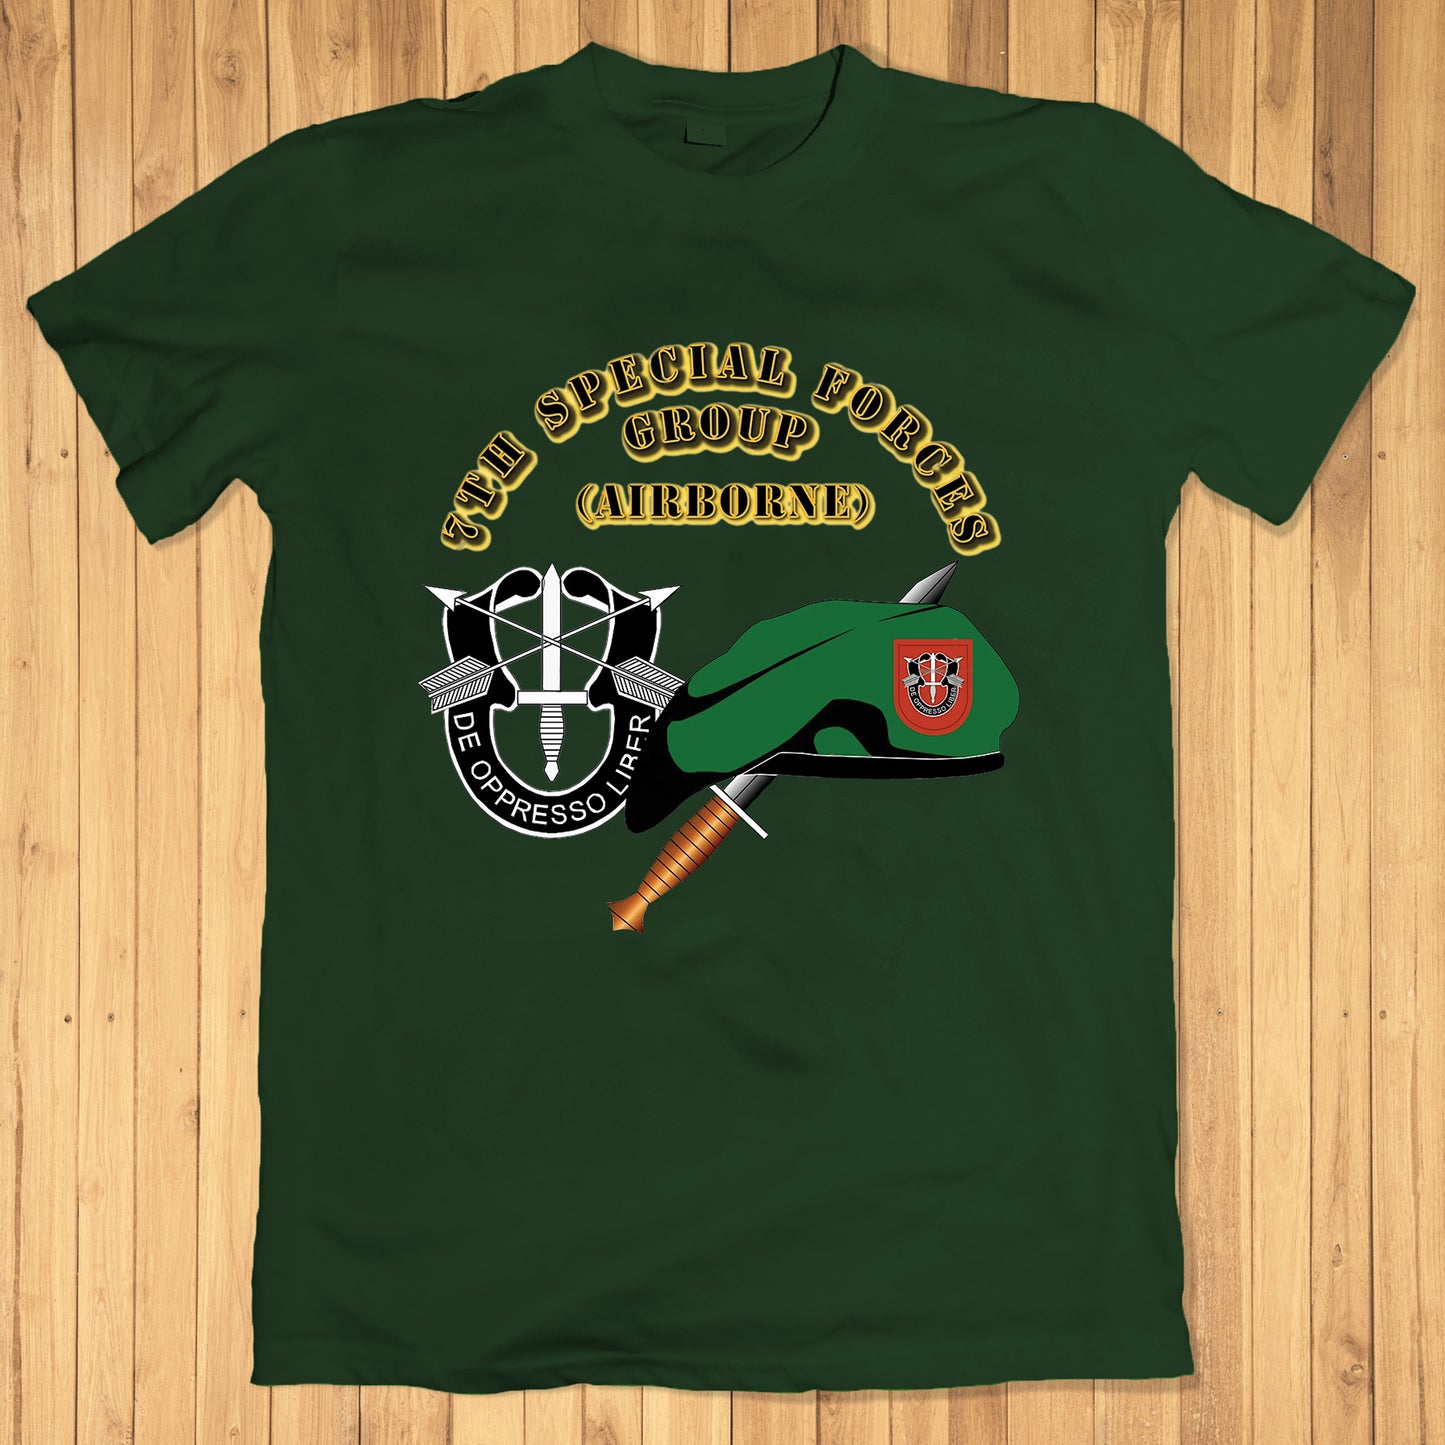 US Army Green Beret 7th Special Forces Group (Airborne) (7th SFG) (A) Beret & Dagger Classic Unisex T-Shirt Gildan 5000 (Made In US) DLMP1304PT04